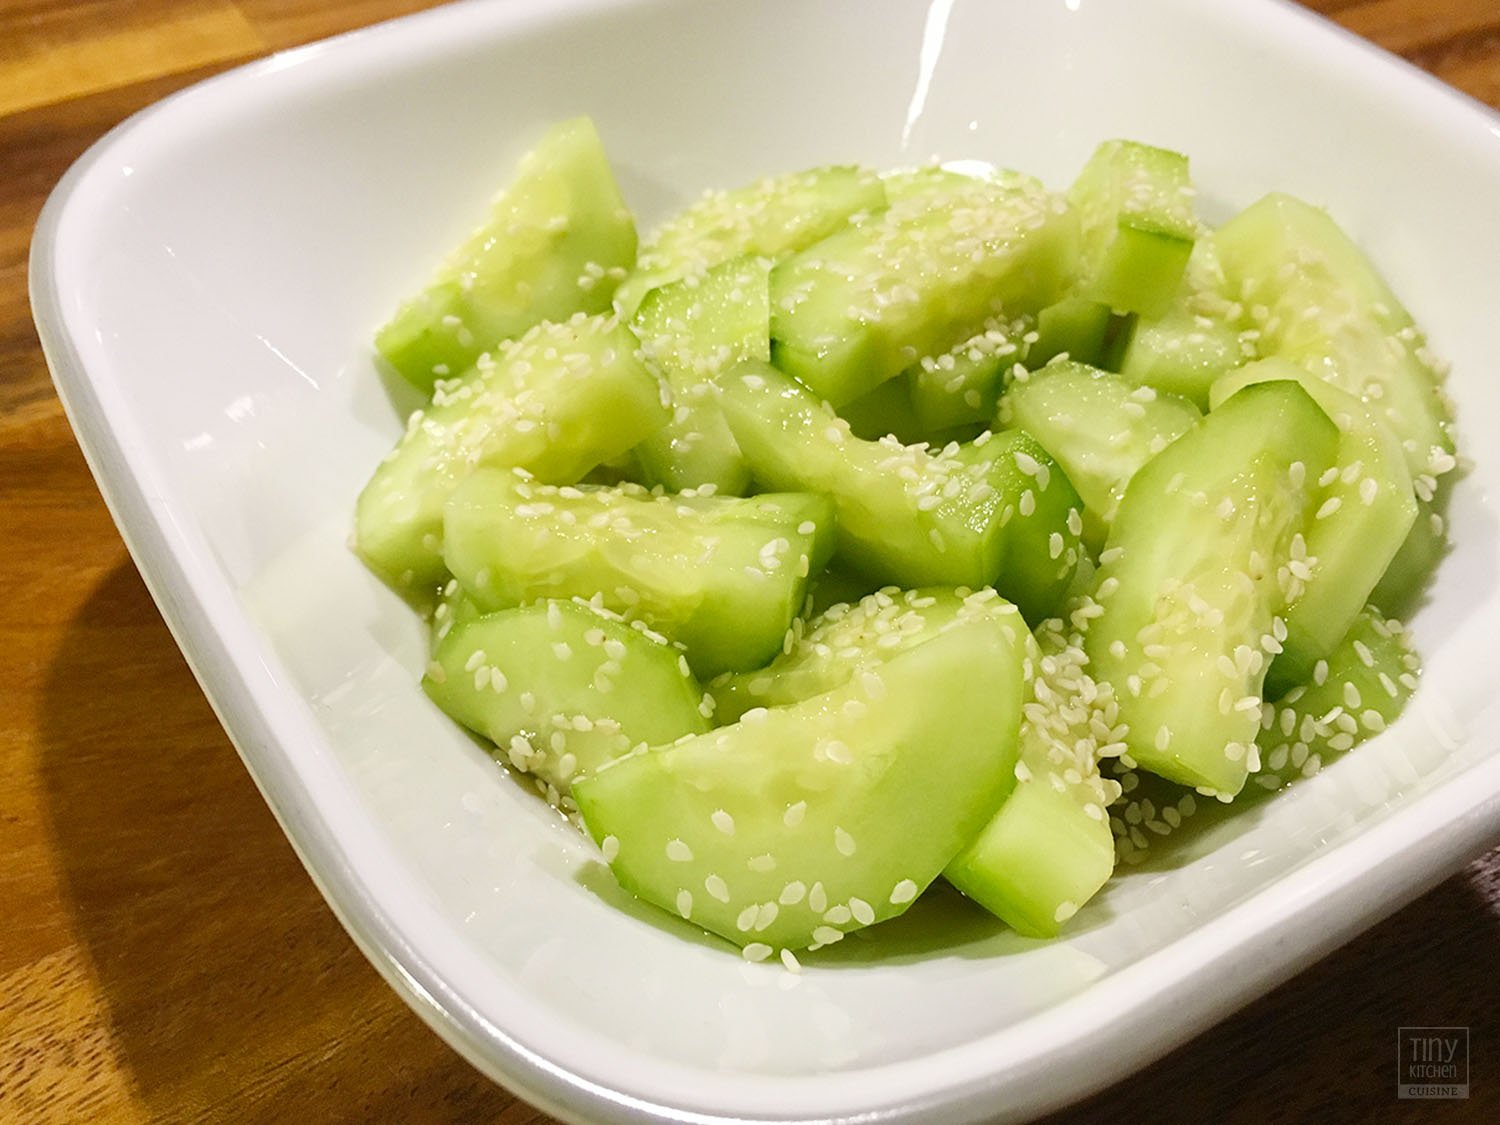 Sunomono is a quick Japanese cucumber salad dressed with minimal ingredients. This sweet and tangy side dish goes well with any Asian meal.